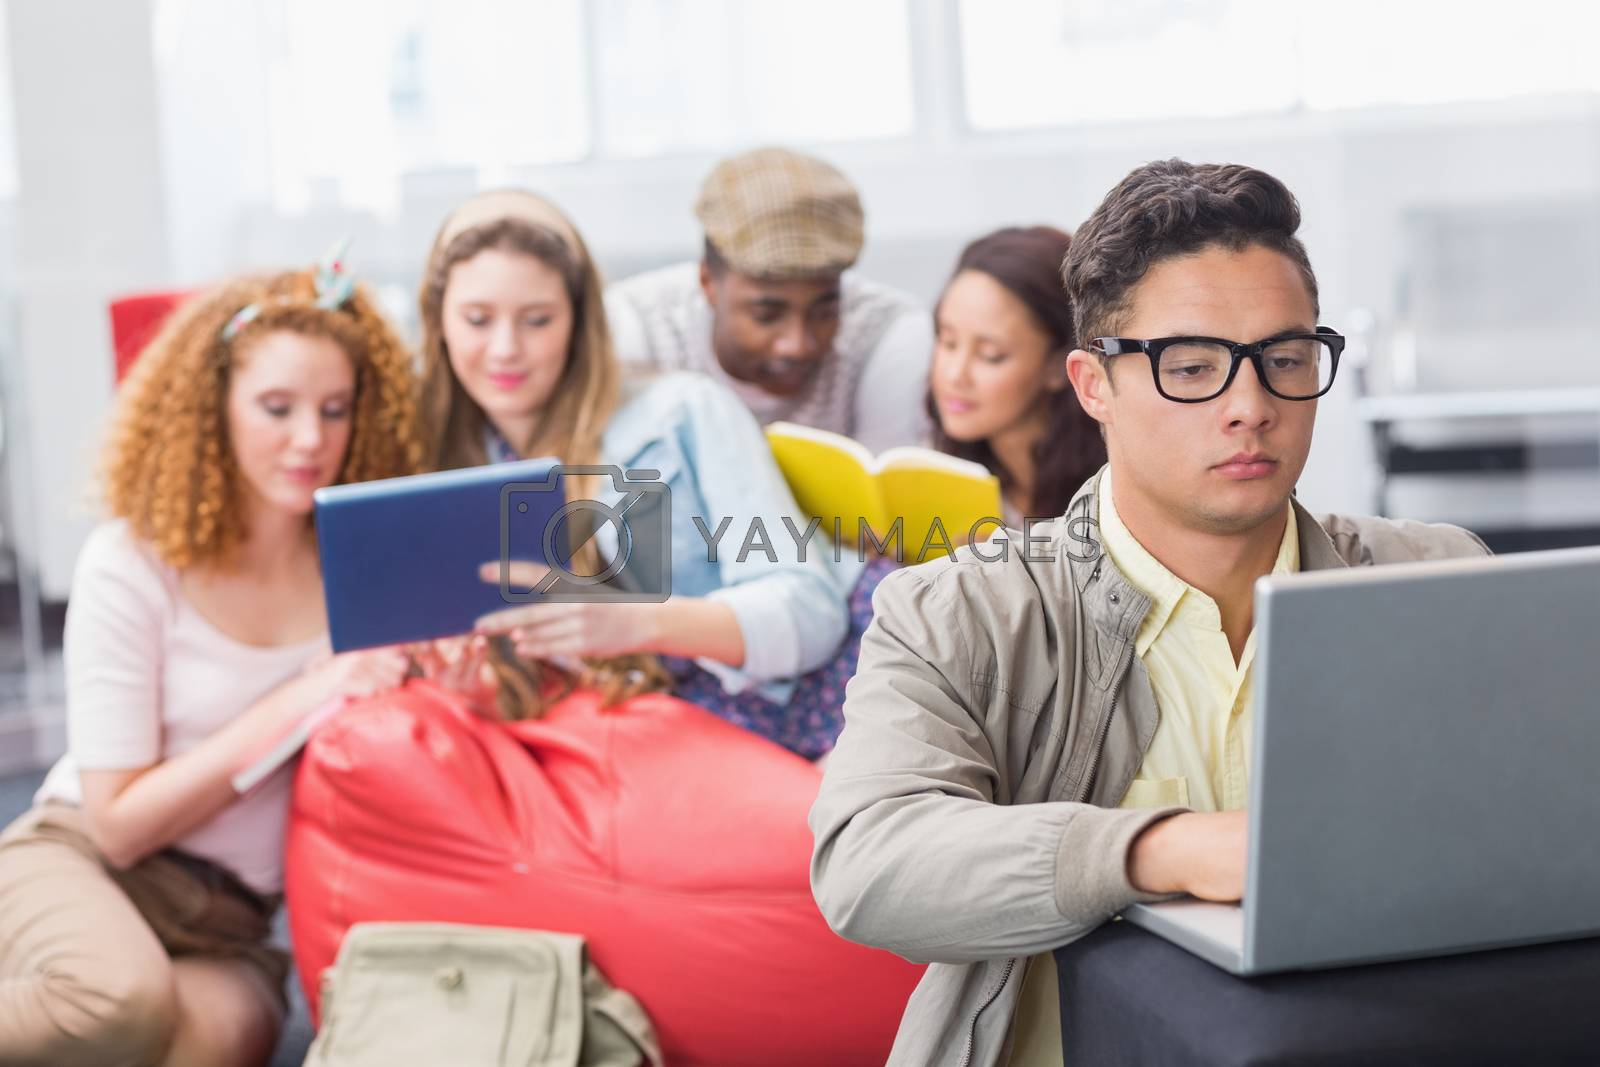 Royalty free image of Fashion student using his laptop by Wavebreakmedia